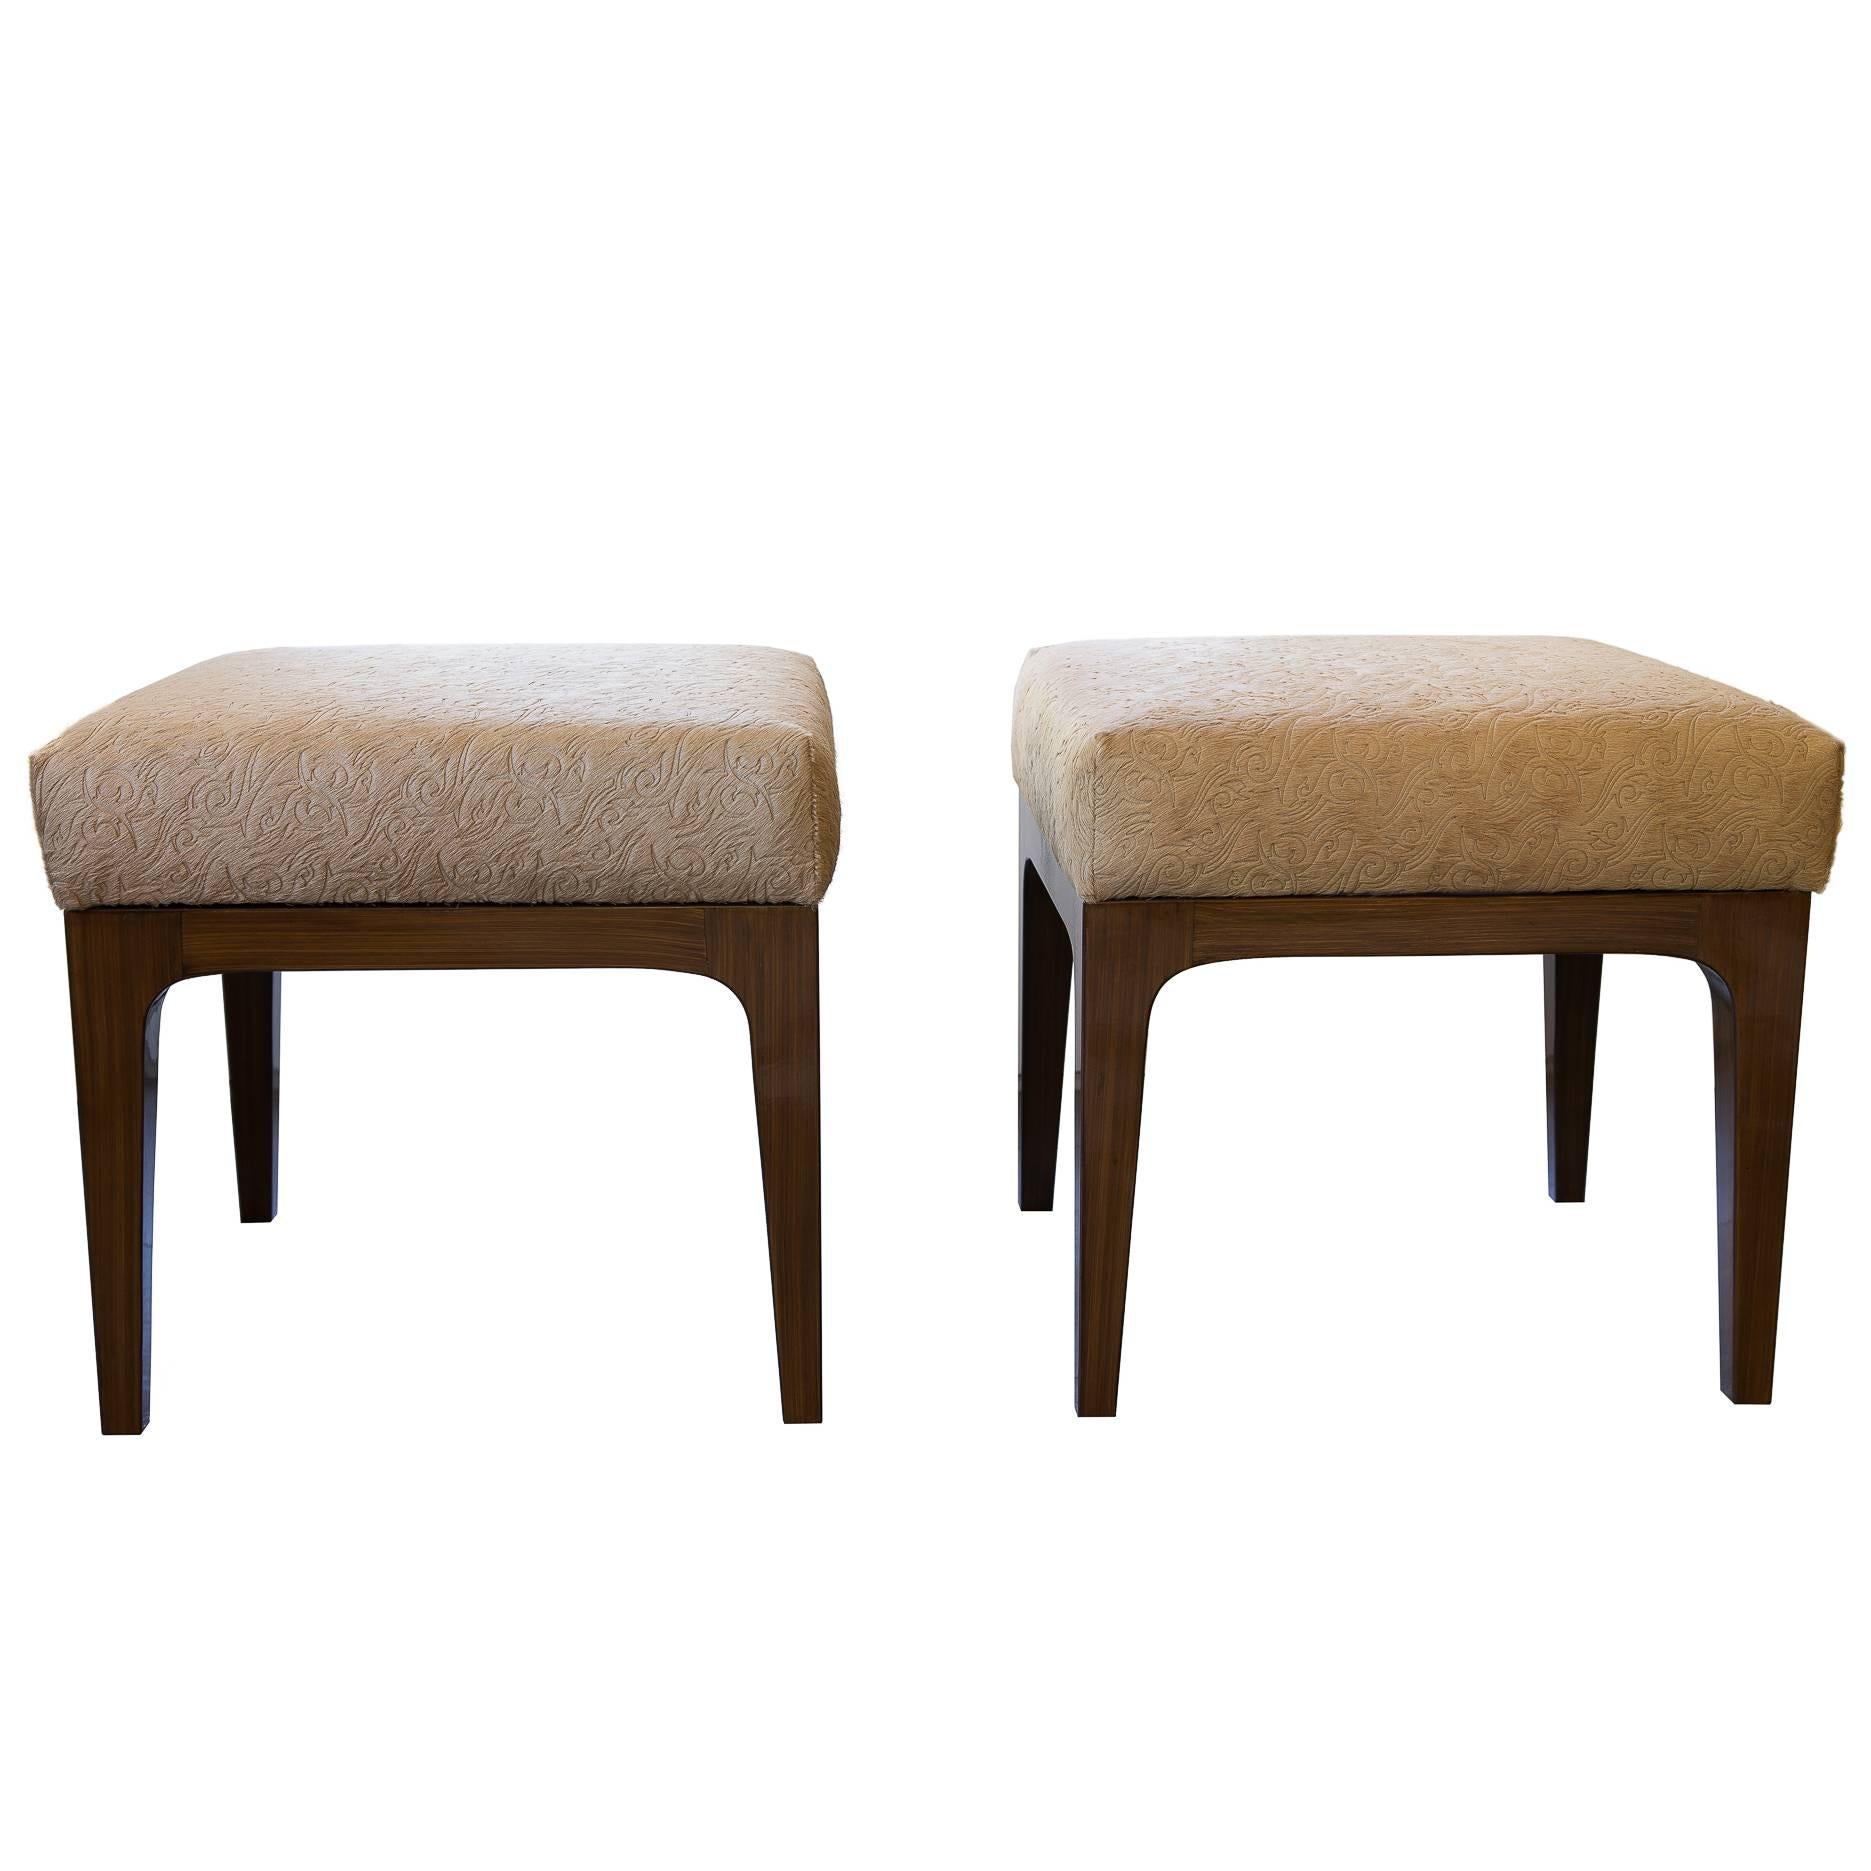 Pair of Mid-Century Modern Style Laser Cut Floral Pattern Cowhide Ottomans For Sale